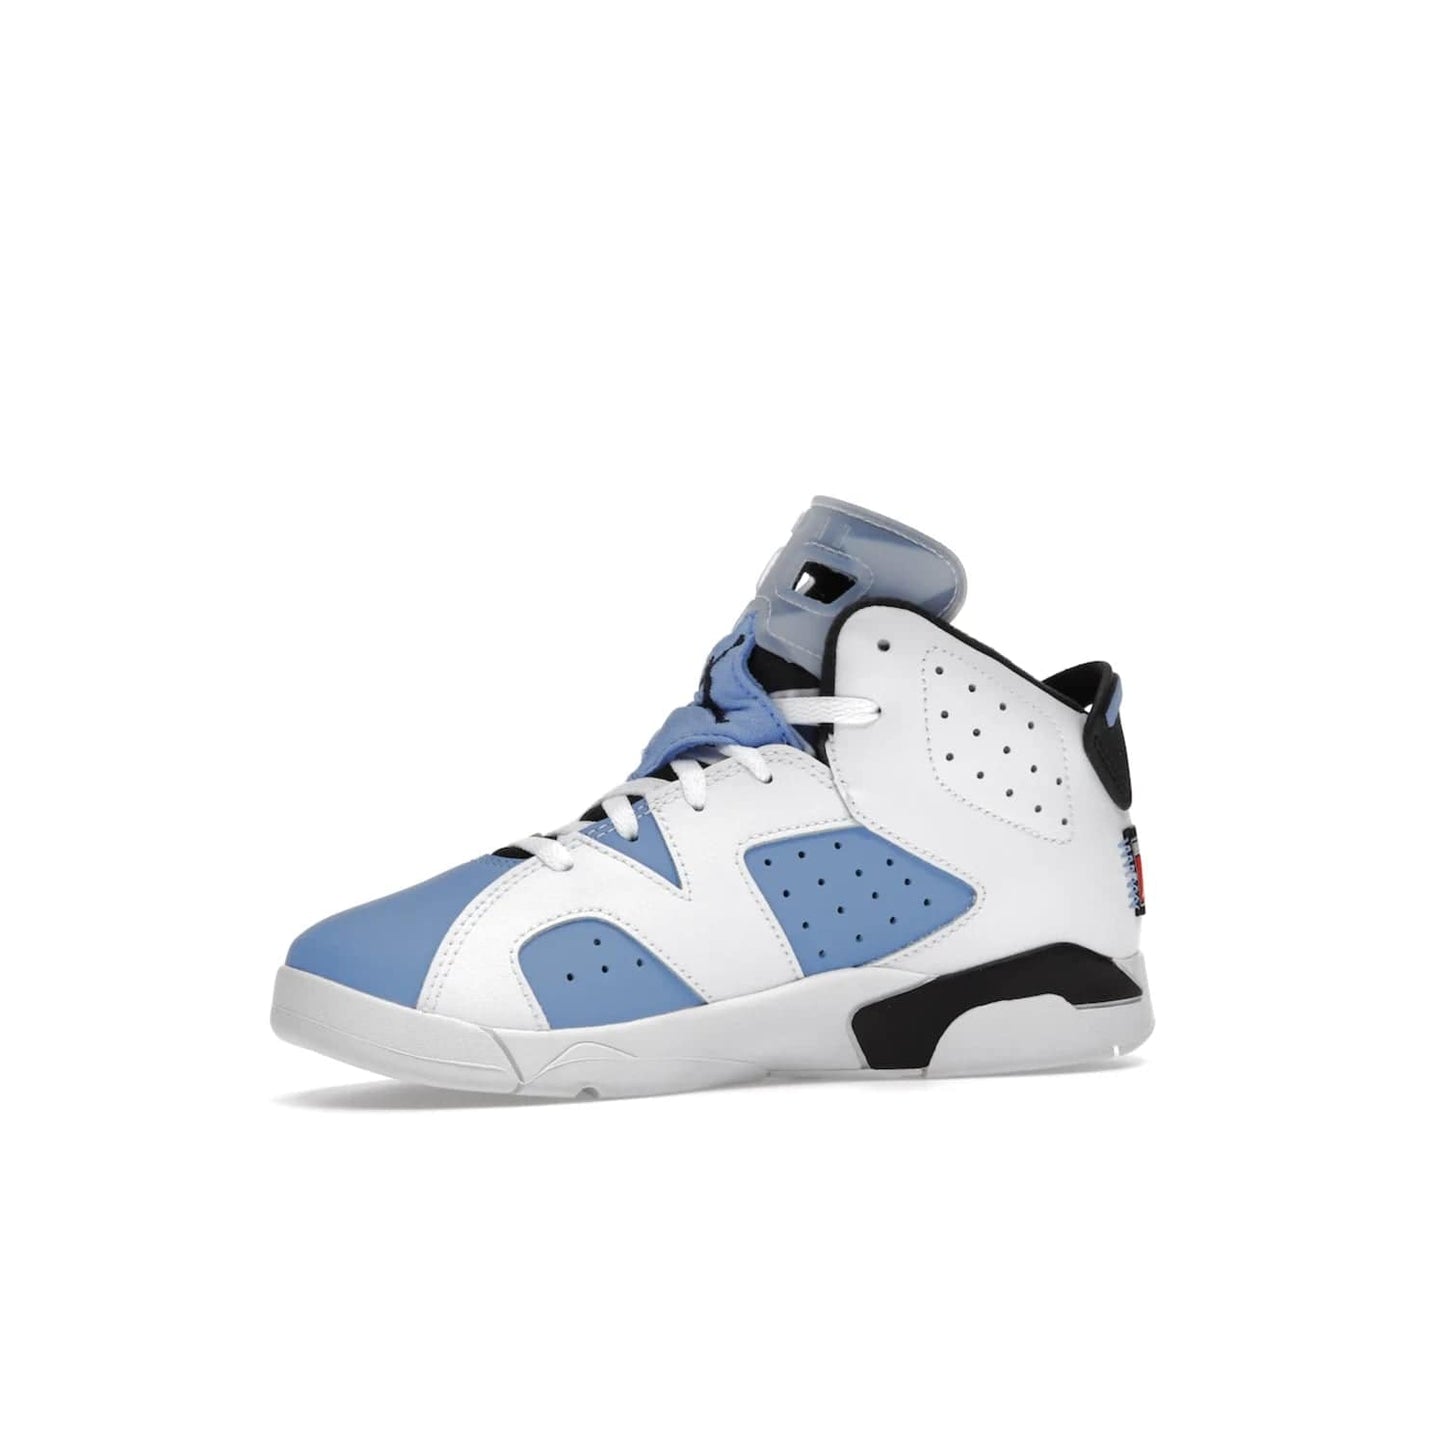 Jordan 6 Retro UNC White (PS) - Image 17 - Only at www.BallersClubKickz.com - The Air Jordan 6 Retro UNC White PS celebrates Michael Jordan's alma mater, the University of North Carolina. It features a classic color-blocking of the iconic Jordan 6 Carmine and a stitched Jordan Team patch. This must-have sneaker released on April 27th, 2022. Referencing the university colors, get this shoe for a stylish and timeless style with university pride.